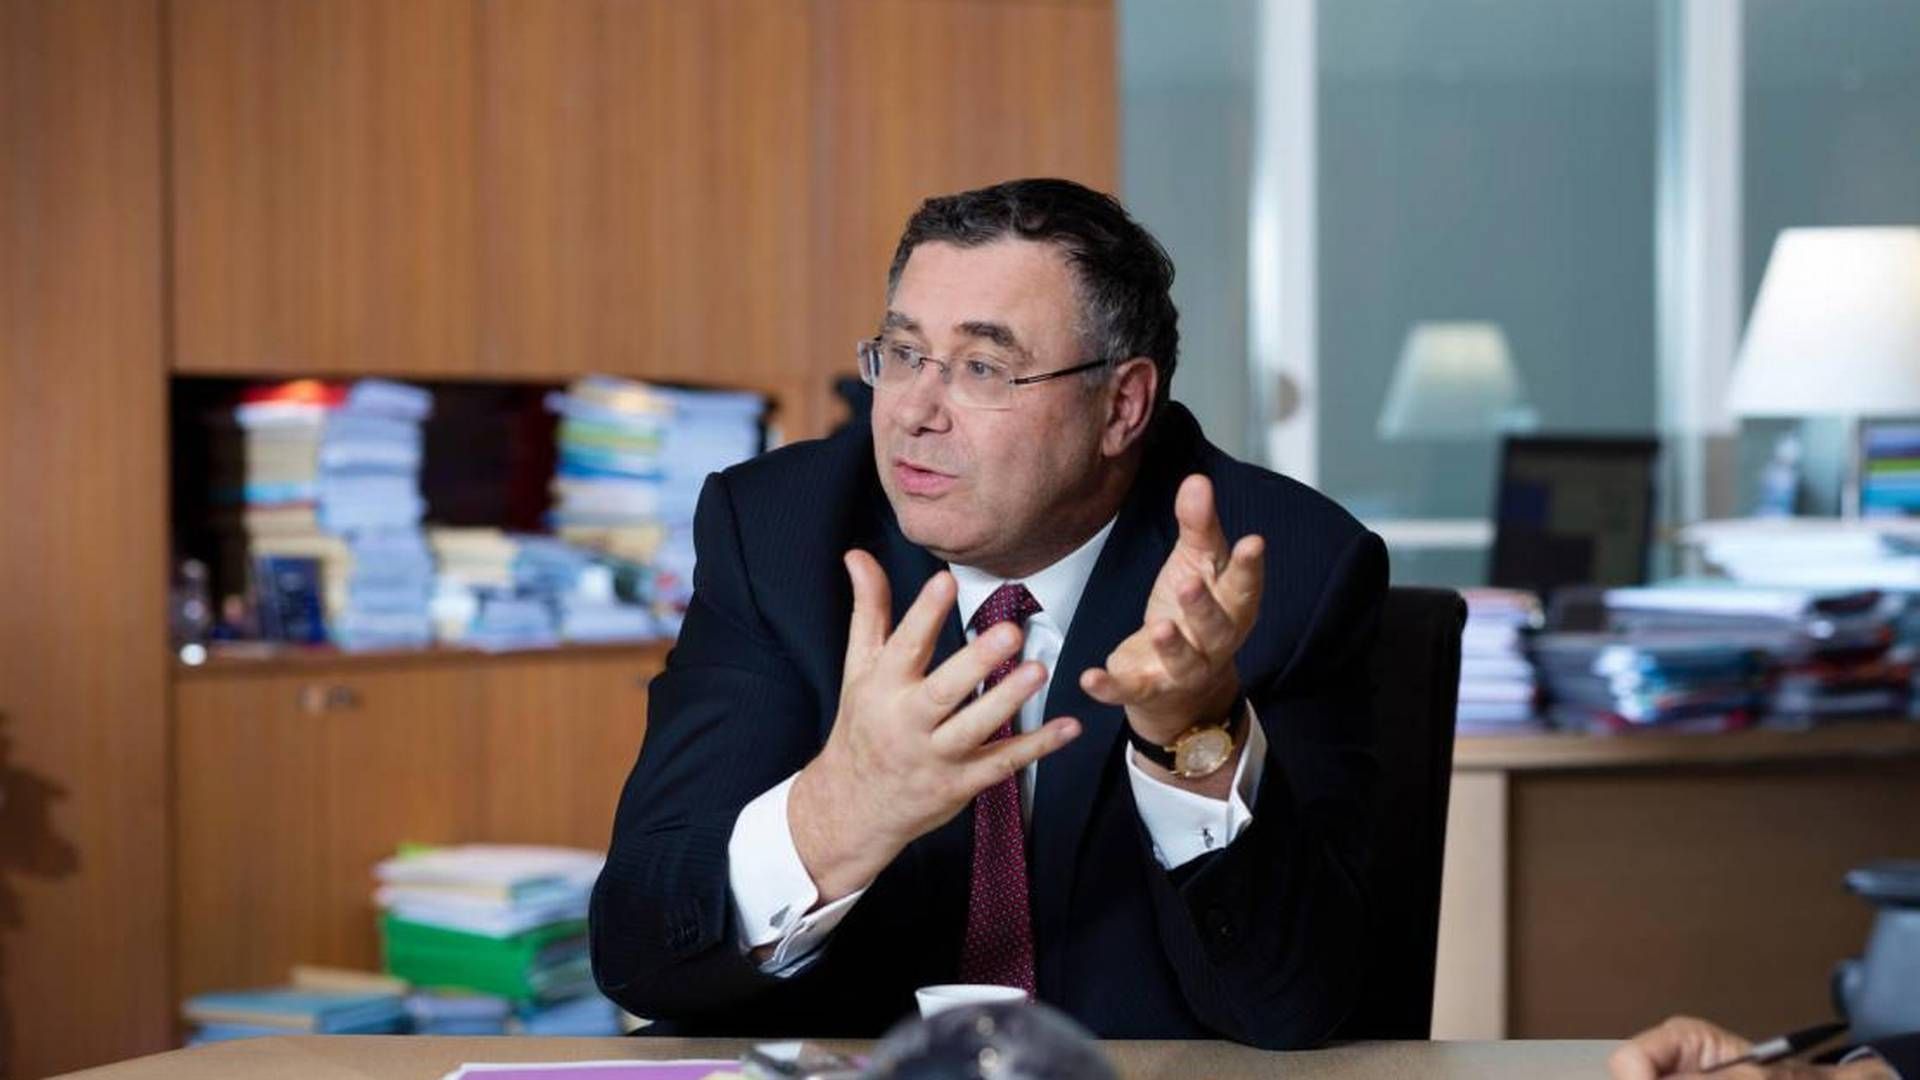 Patrick Pouyanné is the chair and CEO of TotalEnergies. | Photo: TotalEnergies / PR